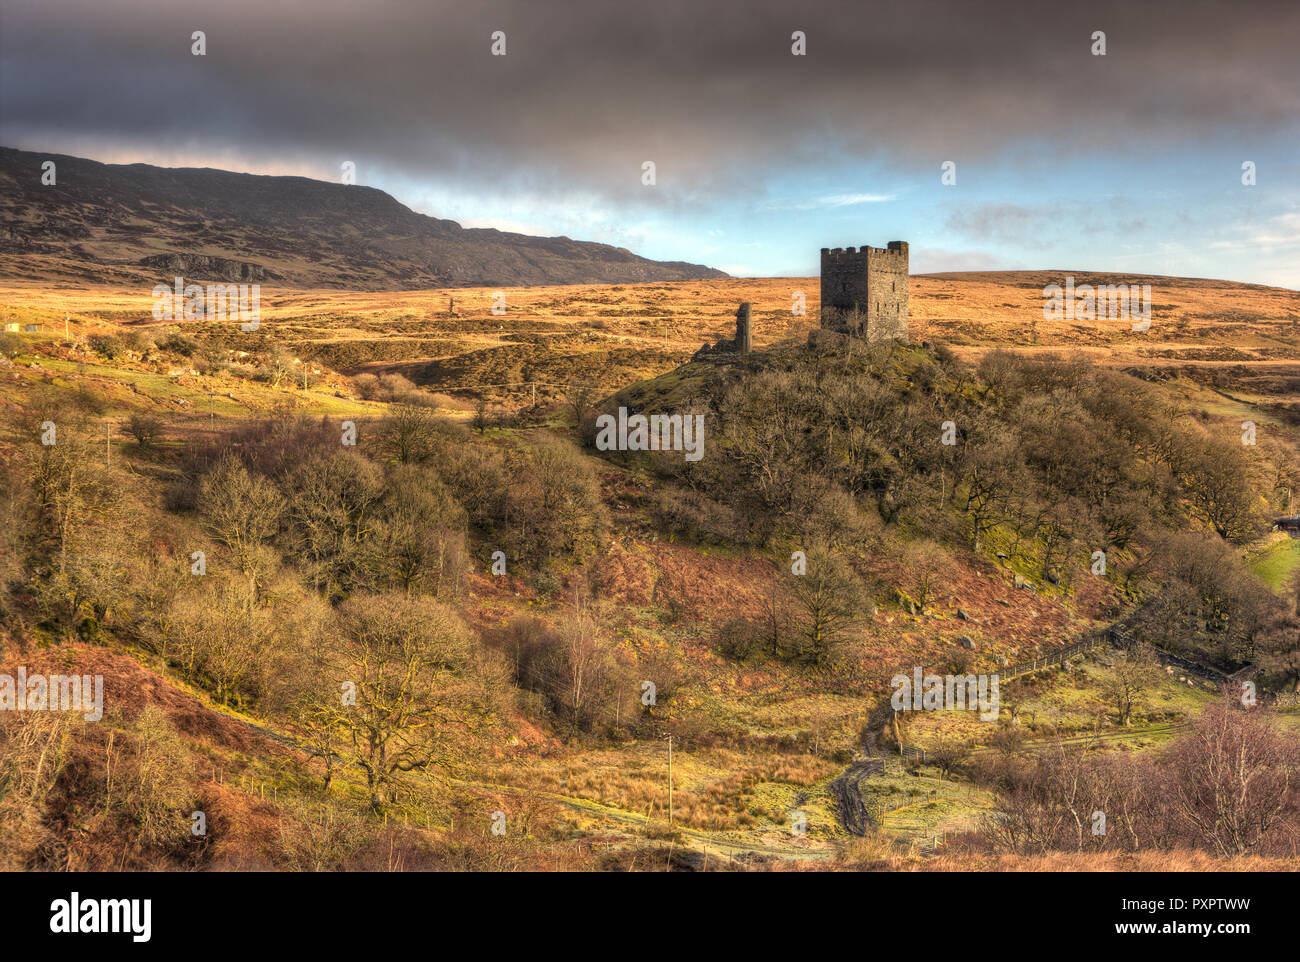 Dolwyddelan castle was built between 1210 and 1240 and was the stronghold of the Princes of Gwynedd. It is located between Blaenau Ffestiniog and Dolw Stock Photo